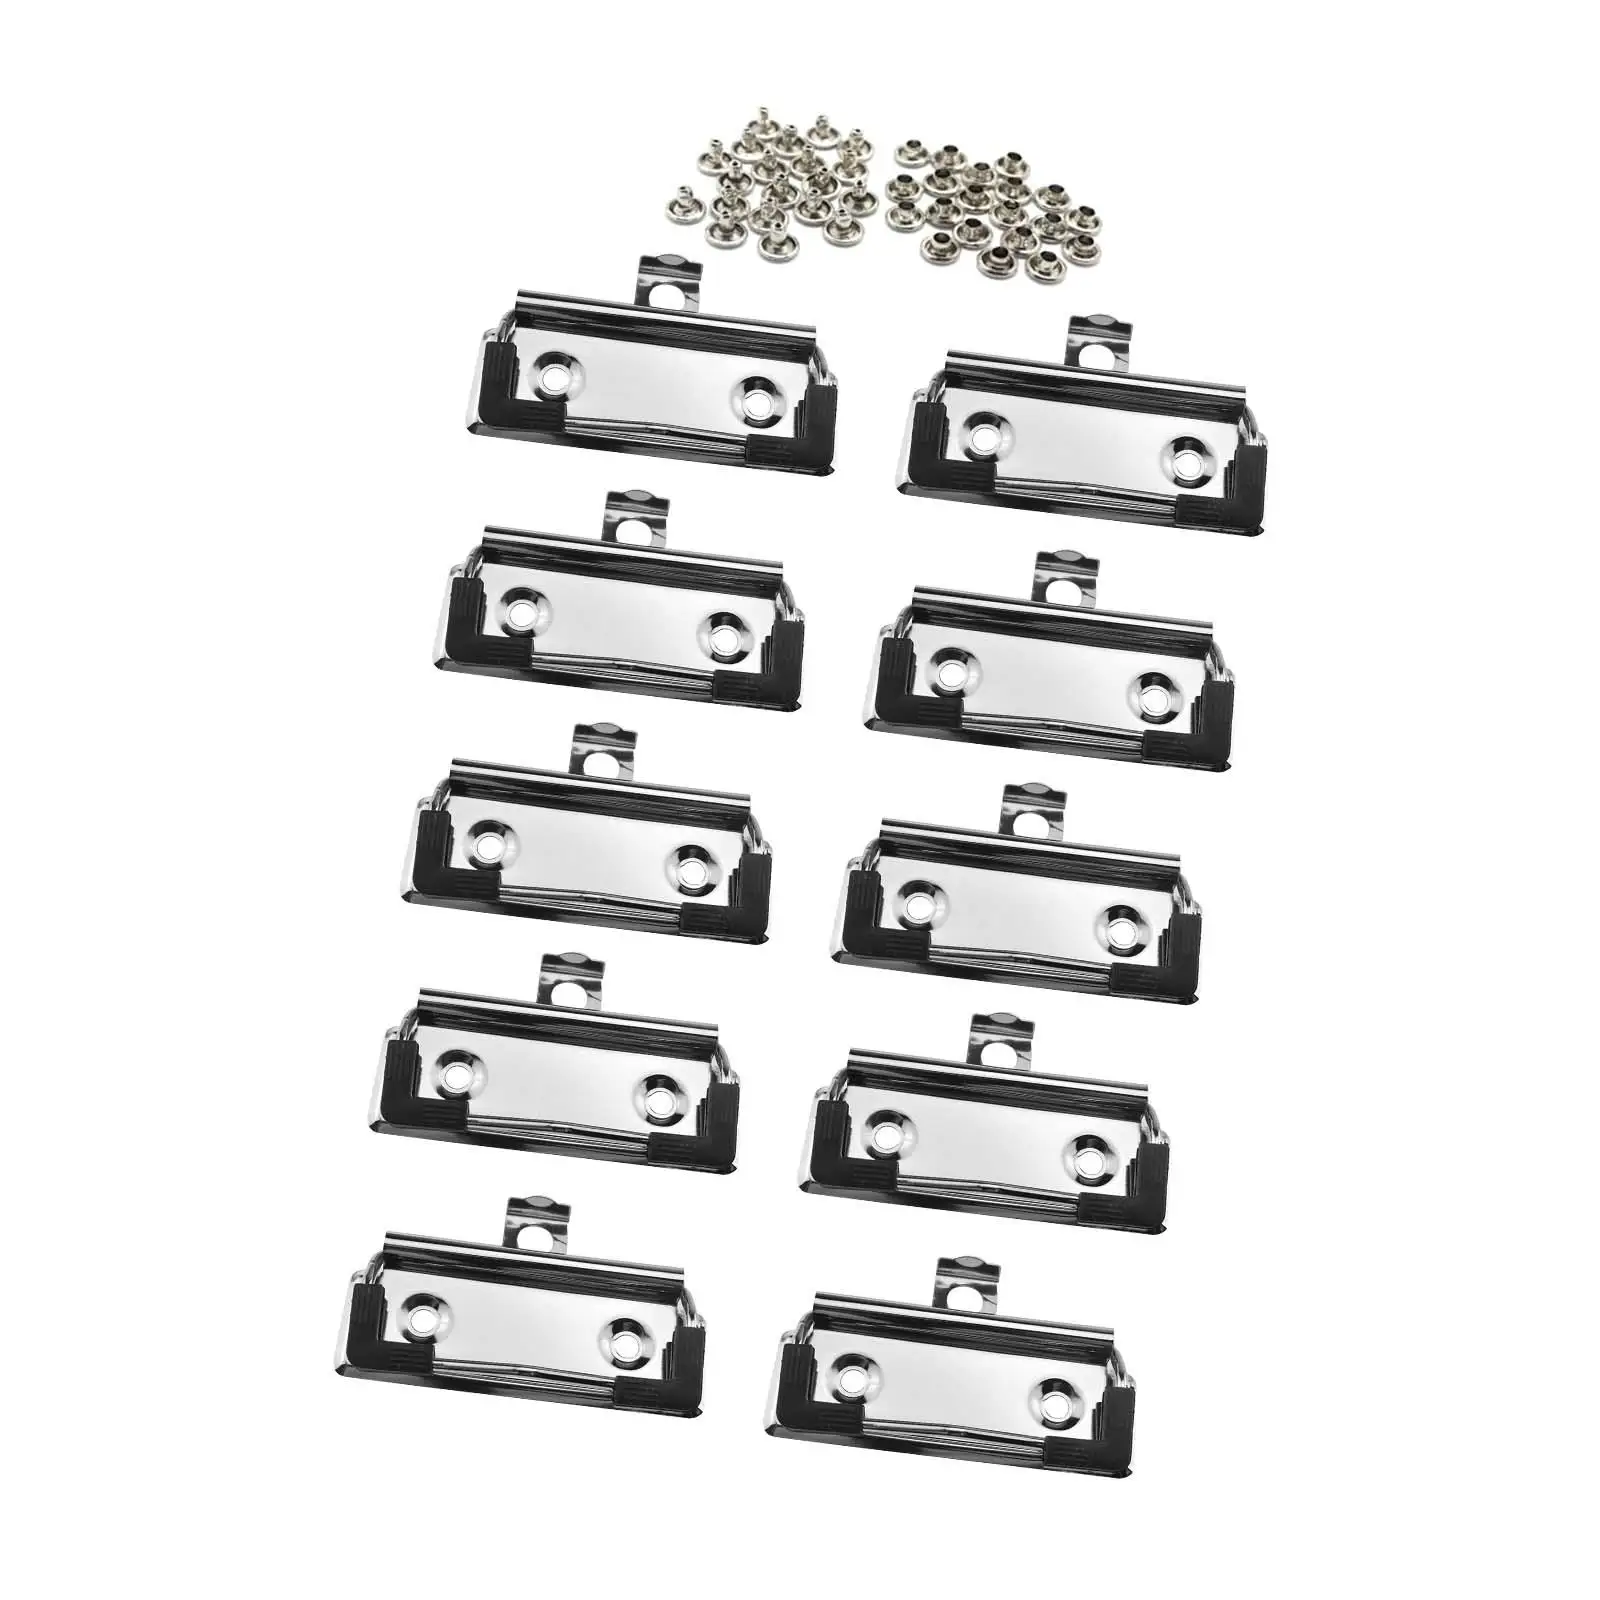 10 Pieces Clipboard Clips Mountable with Rubber Feet Hardboard Clips Spring Loaded Surface Mount Handle Hook for Office Supplies